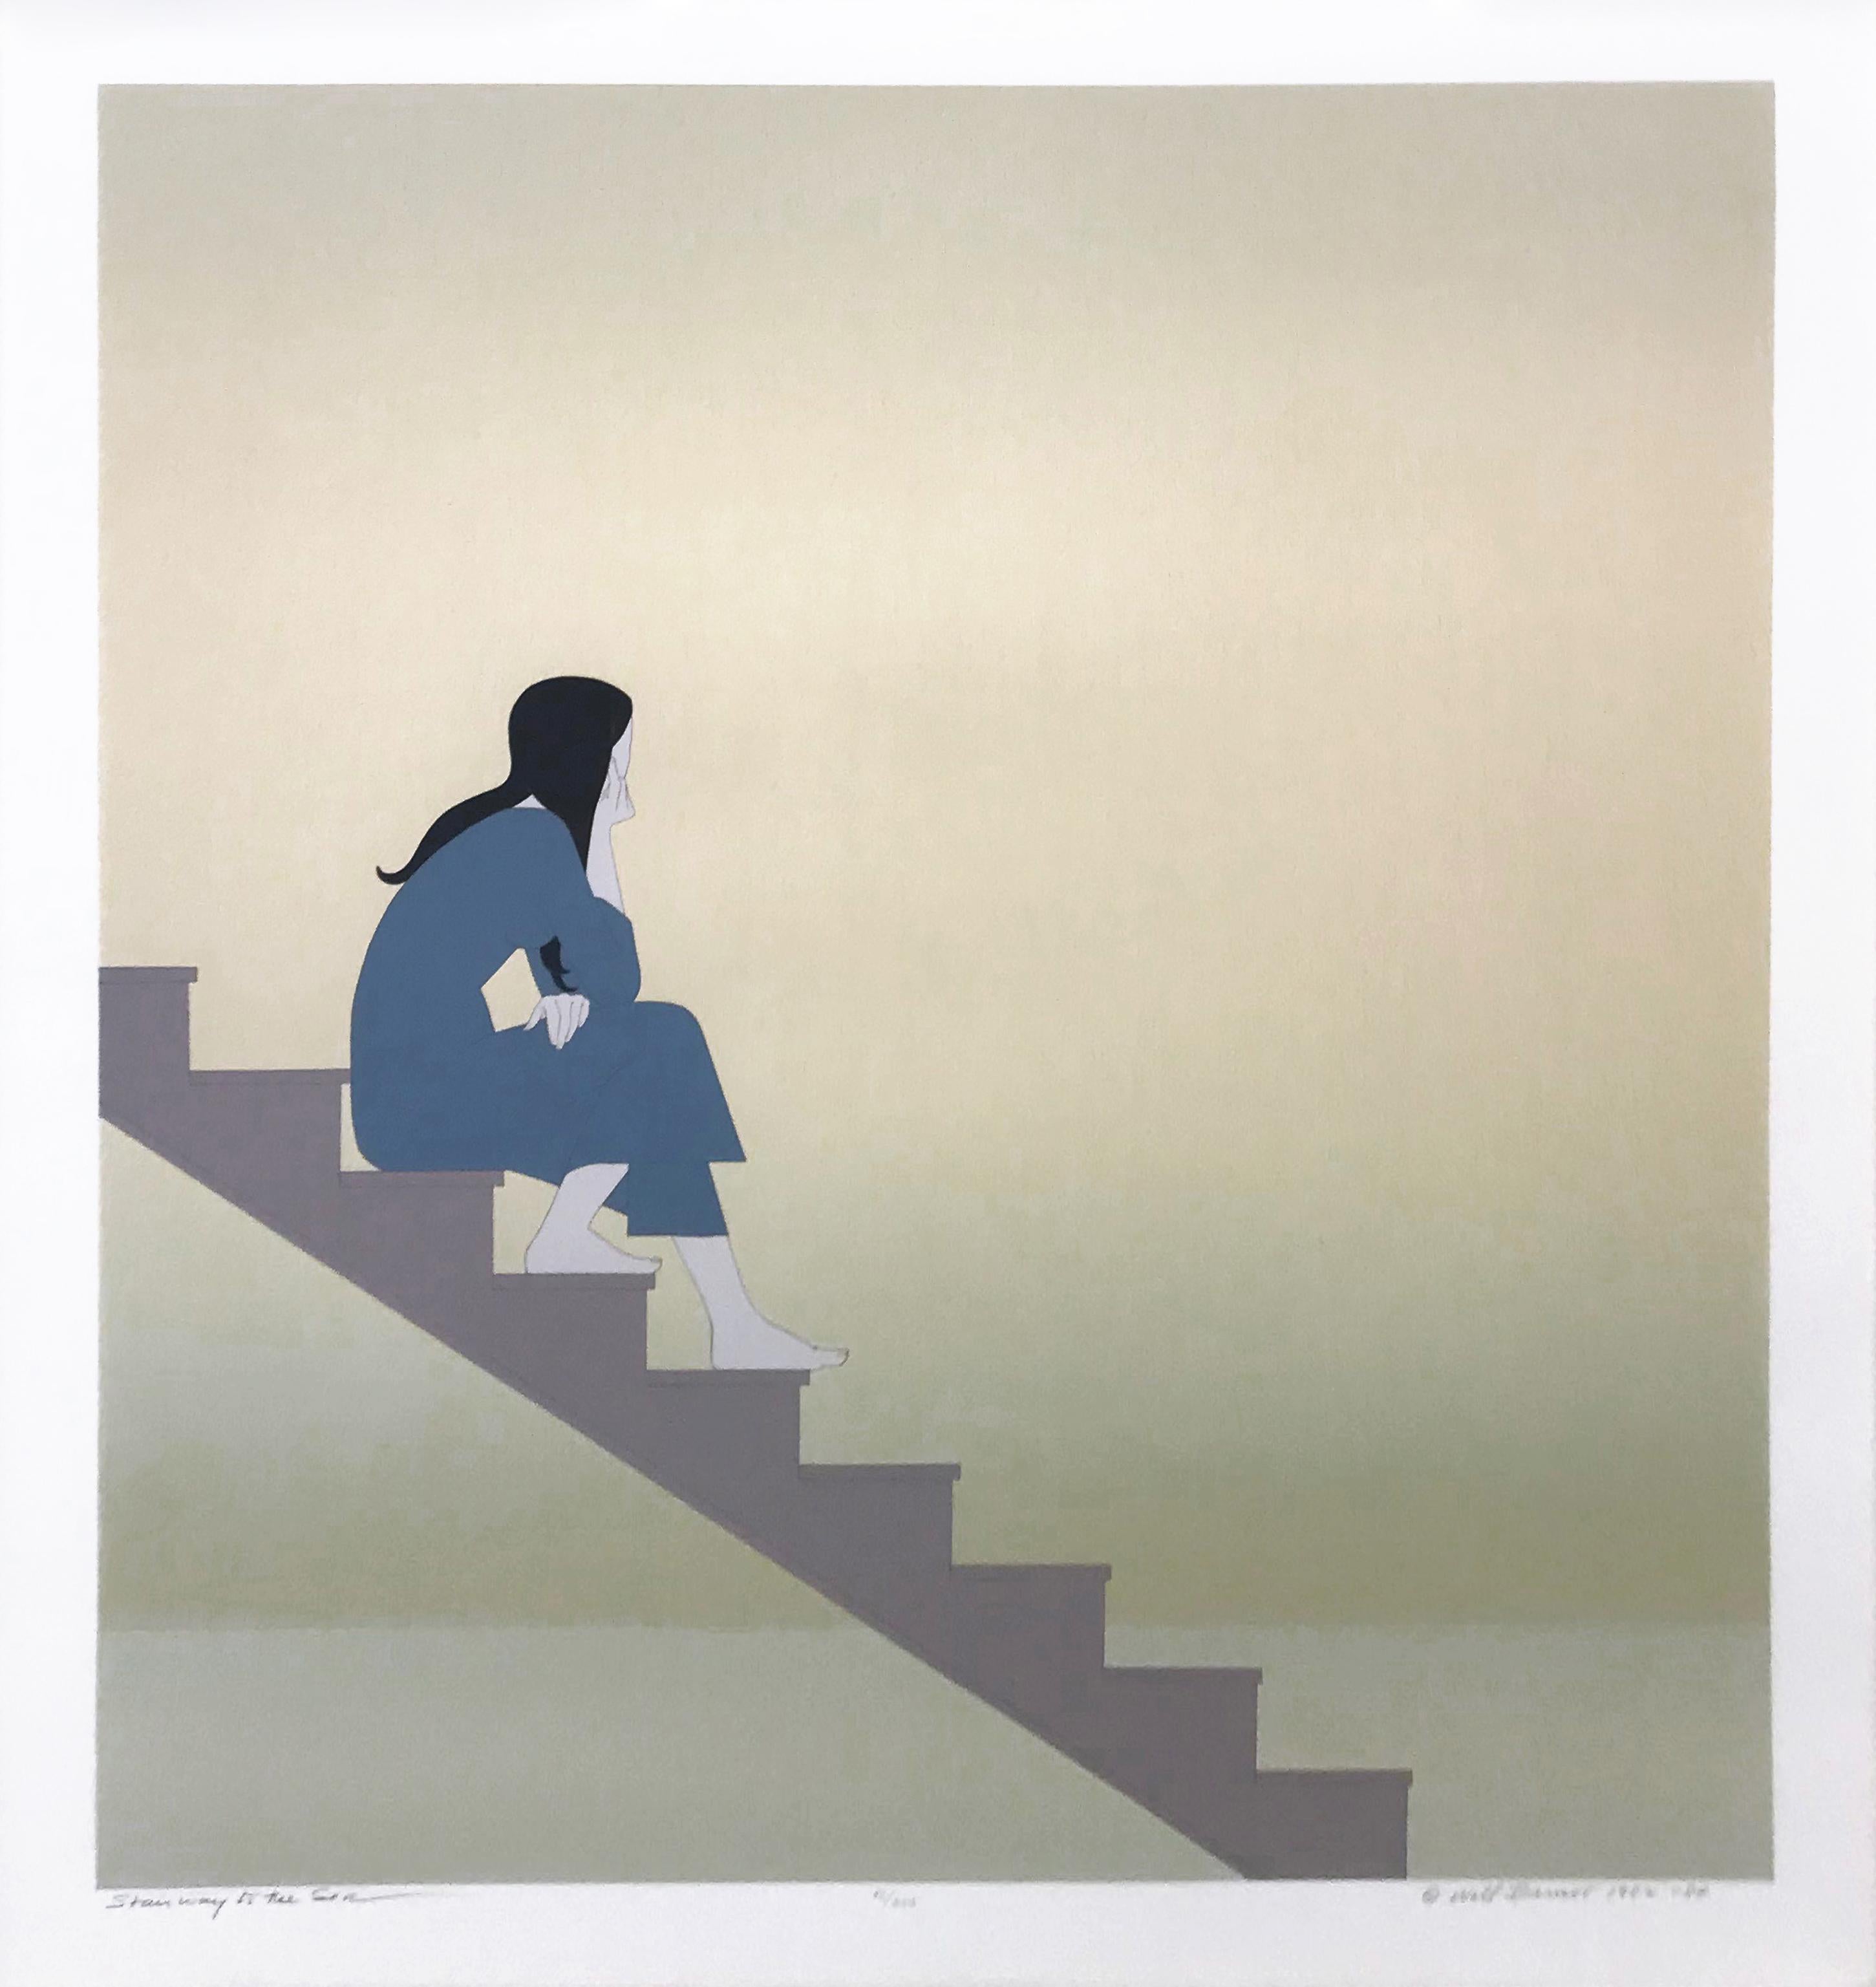 STAIRWAY TO THE SEA - Print by Will Barnet